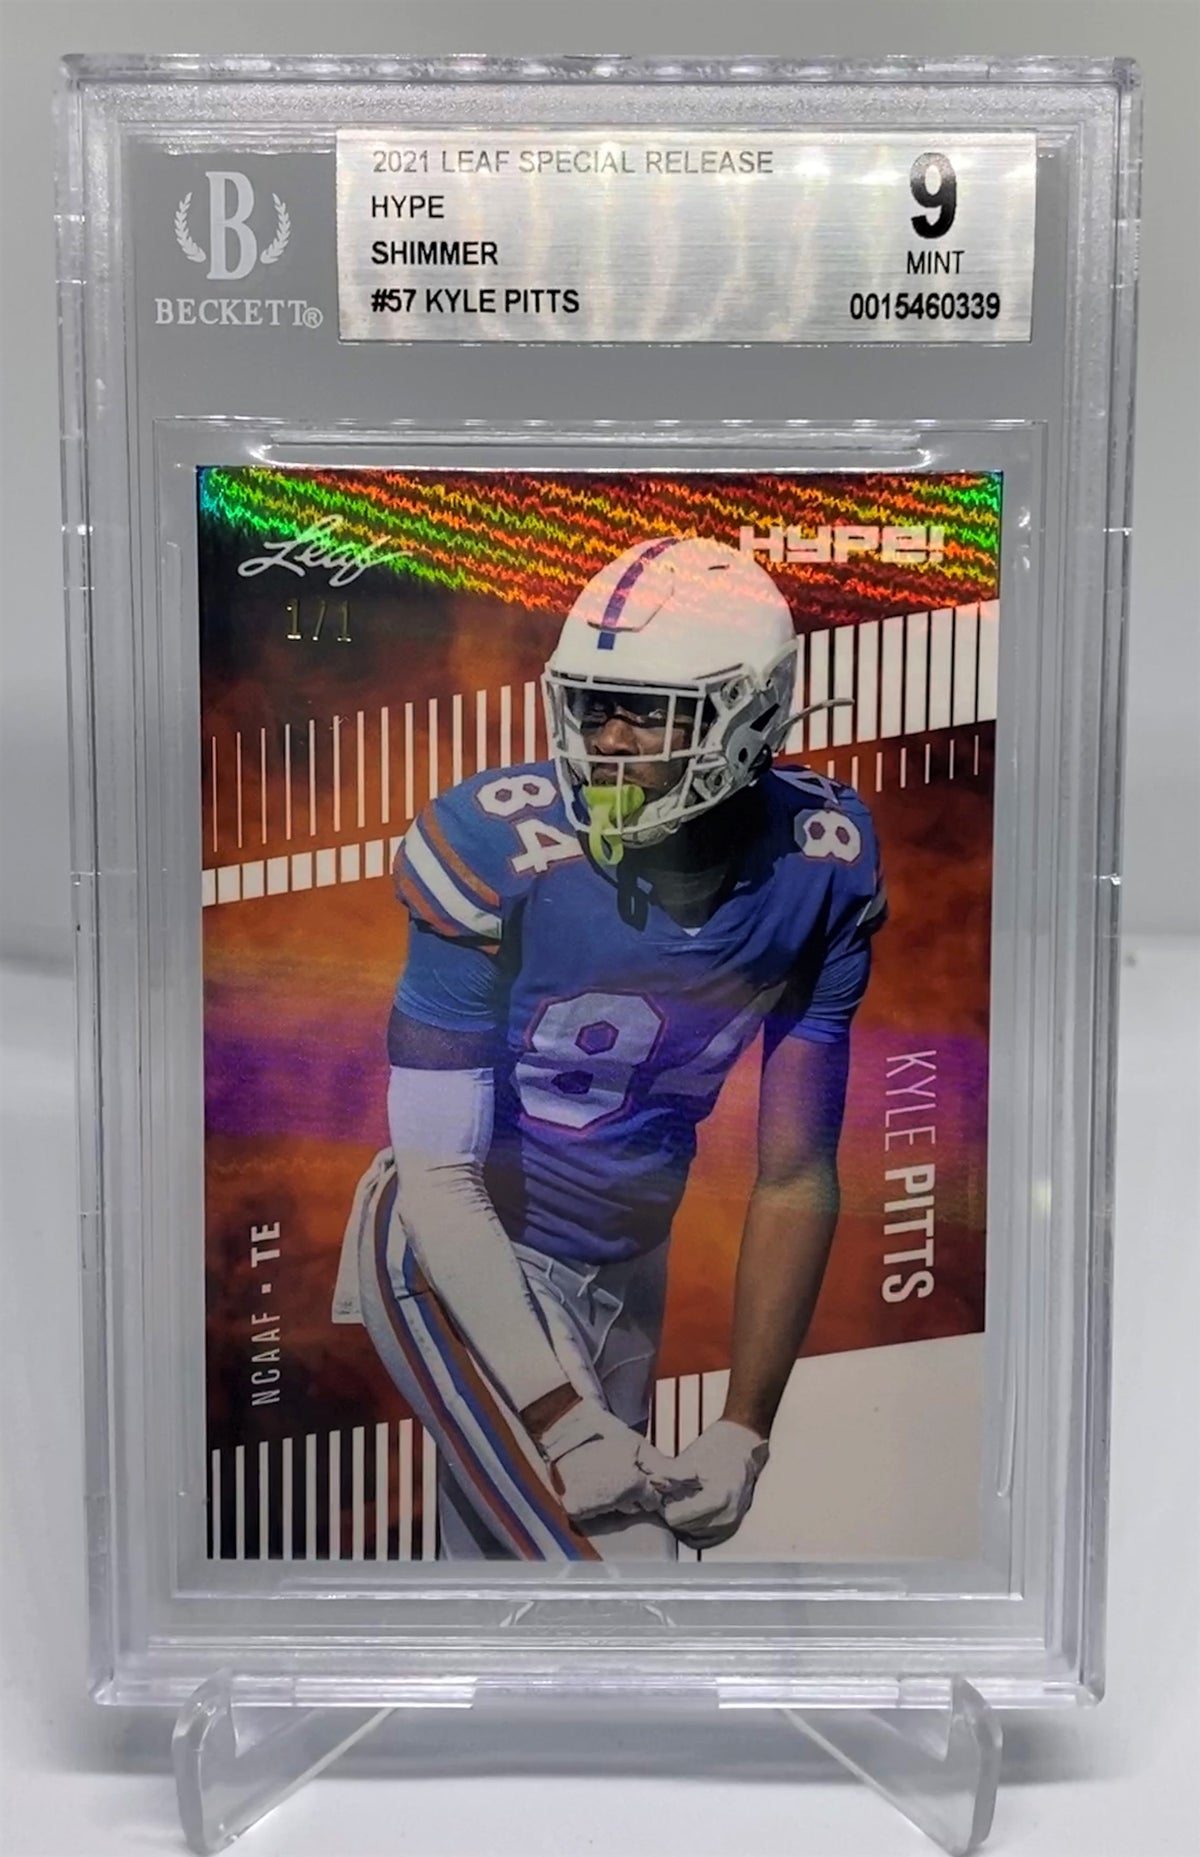 BGS 9 Kyle Pitts 2021 Leaf HYPE! #57 Rookie Card White Shimmer 1 of 1 —  Rookie Cards